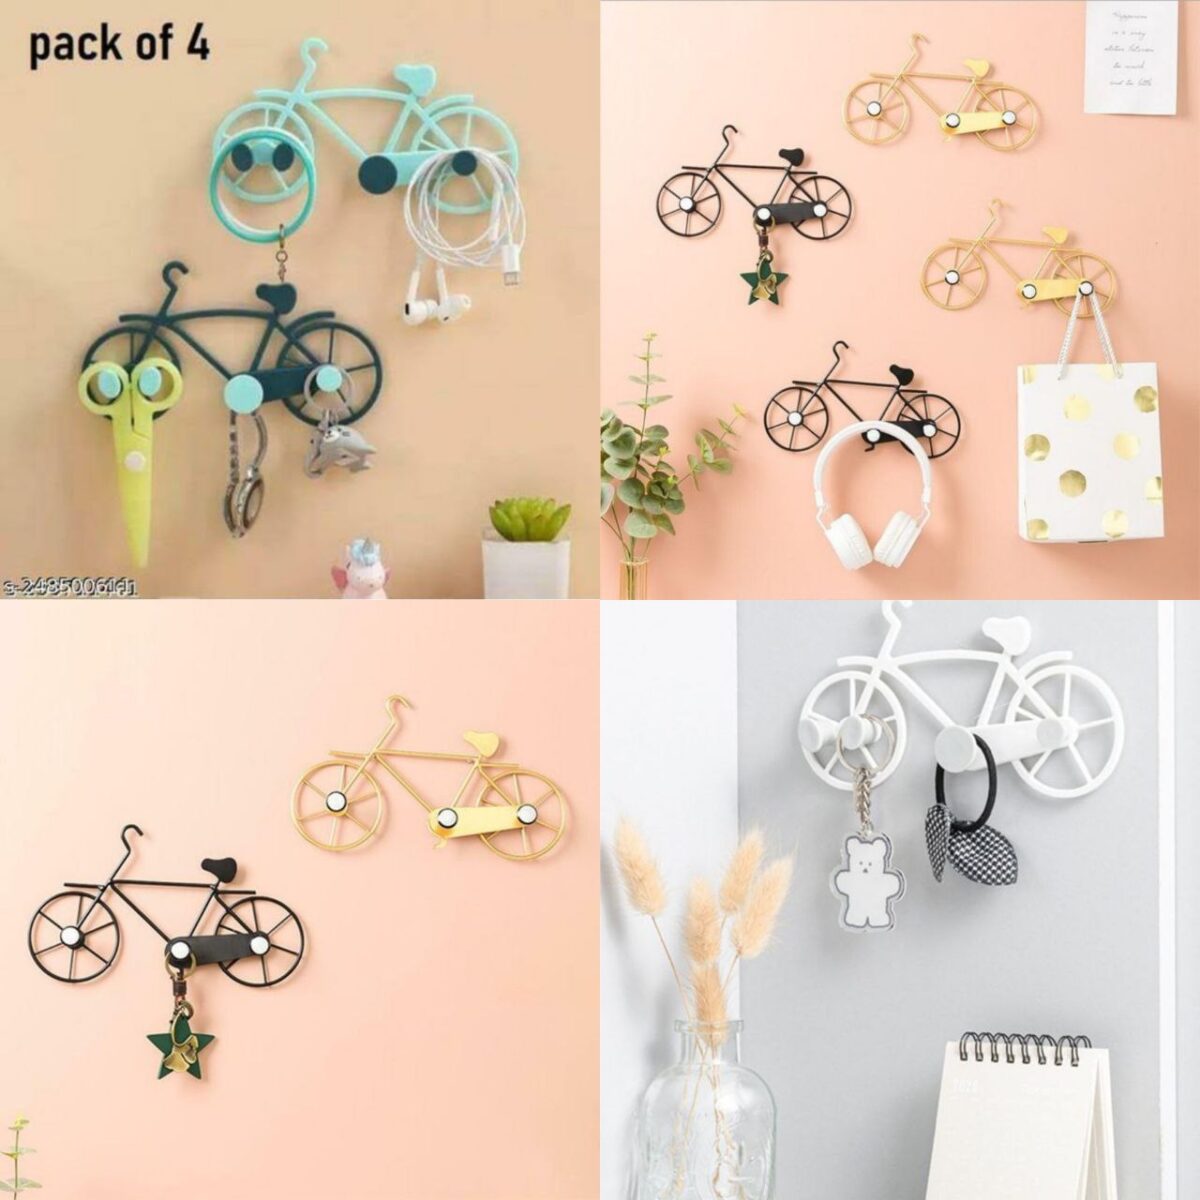 A "bicycle key stand (Set of 4)" appears to be a set of four stands or mounts used to store or hang bicycles securely. These stands are designed to hold the bicycle in place, making it easy to store or display multiple bikes efficiently while also helping to organize and save space. The term "key" in this context might refer to the way these stands are secured or locked in place.